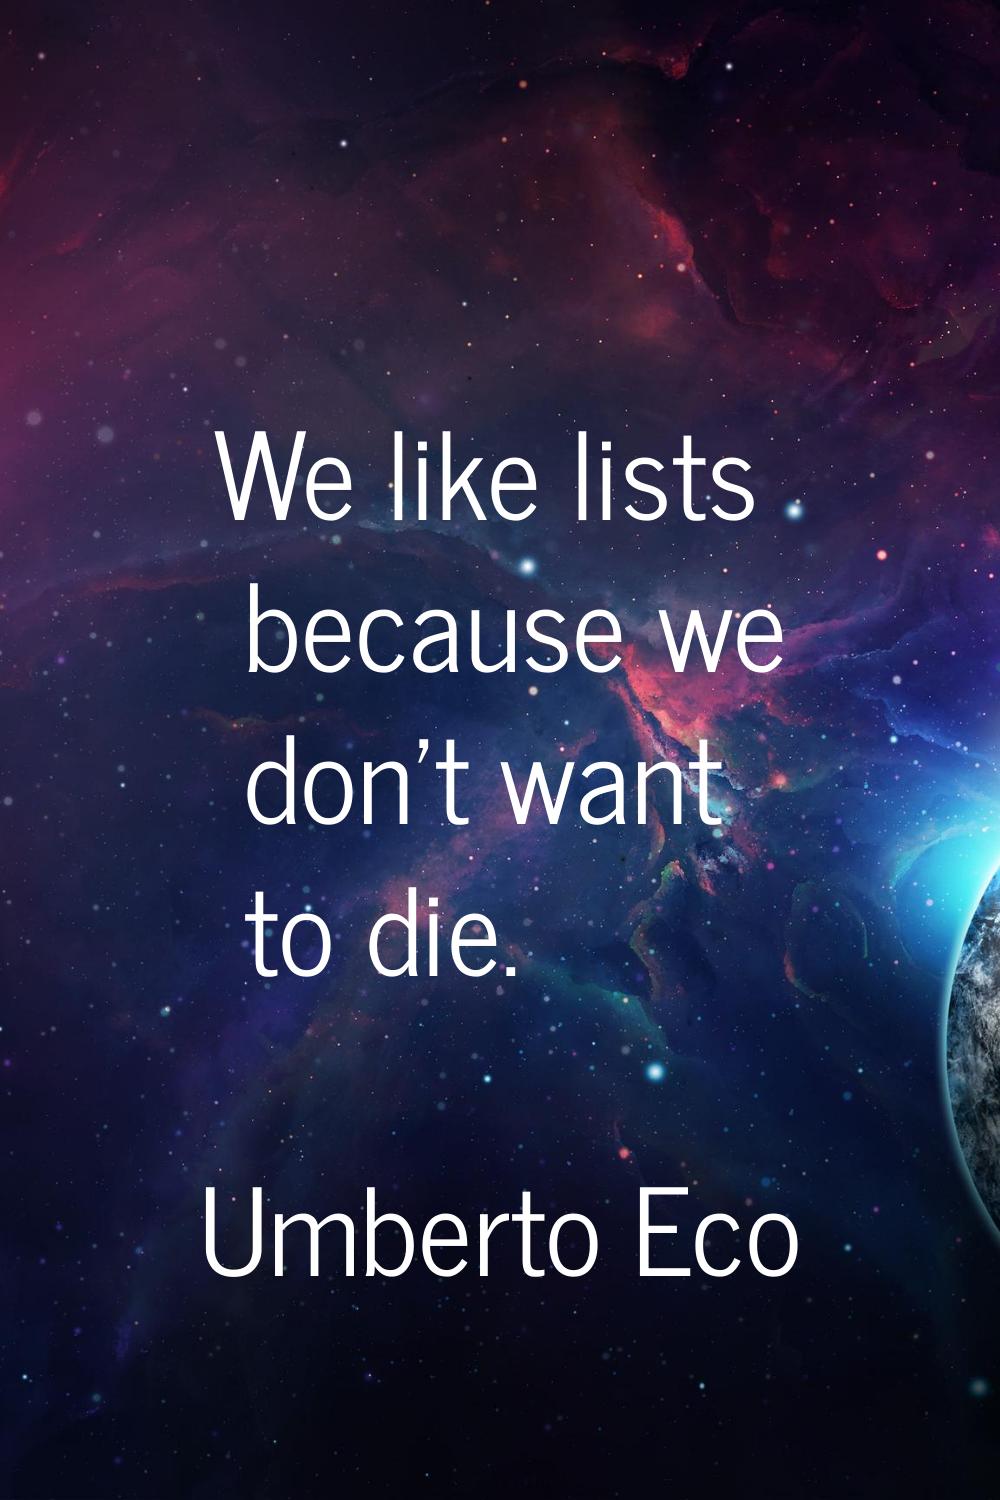 We like lists because we don't want to die.